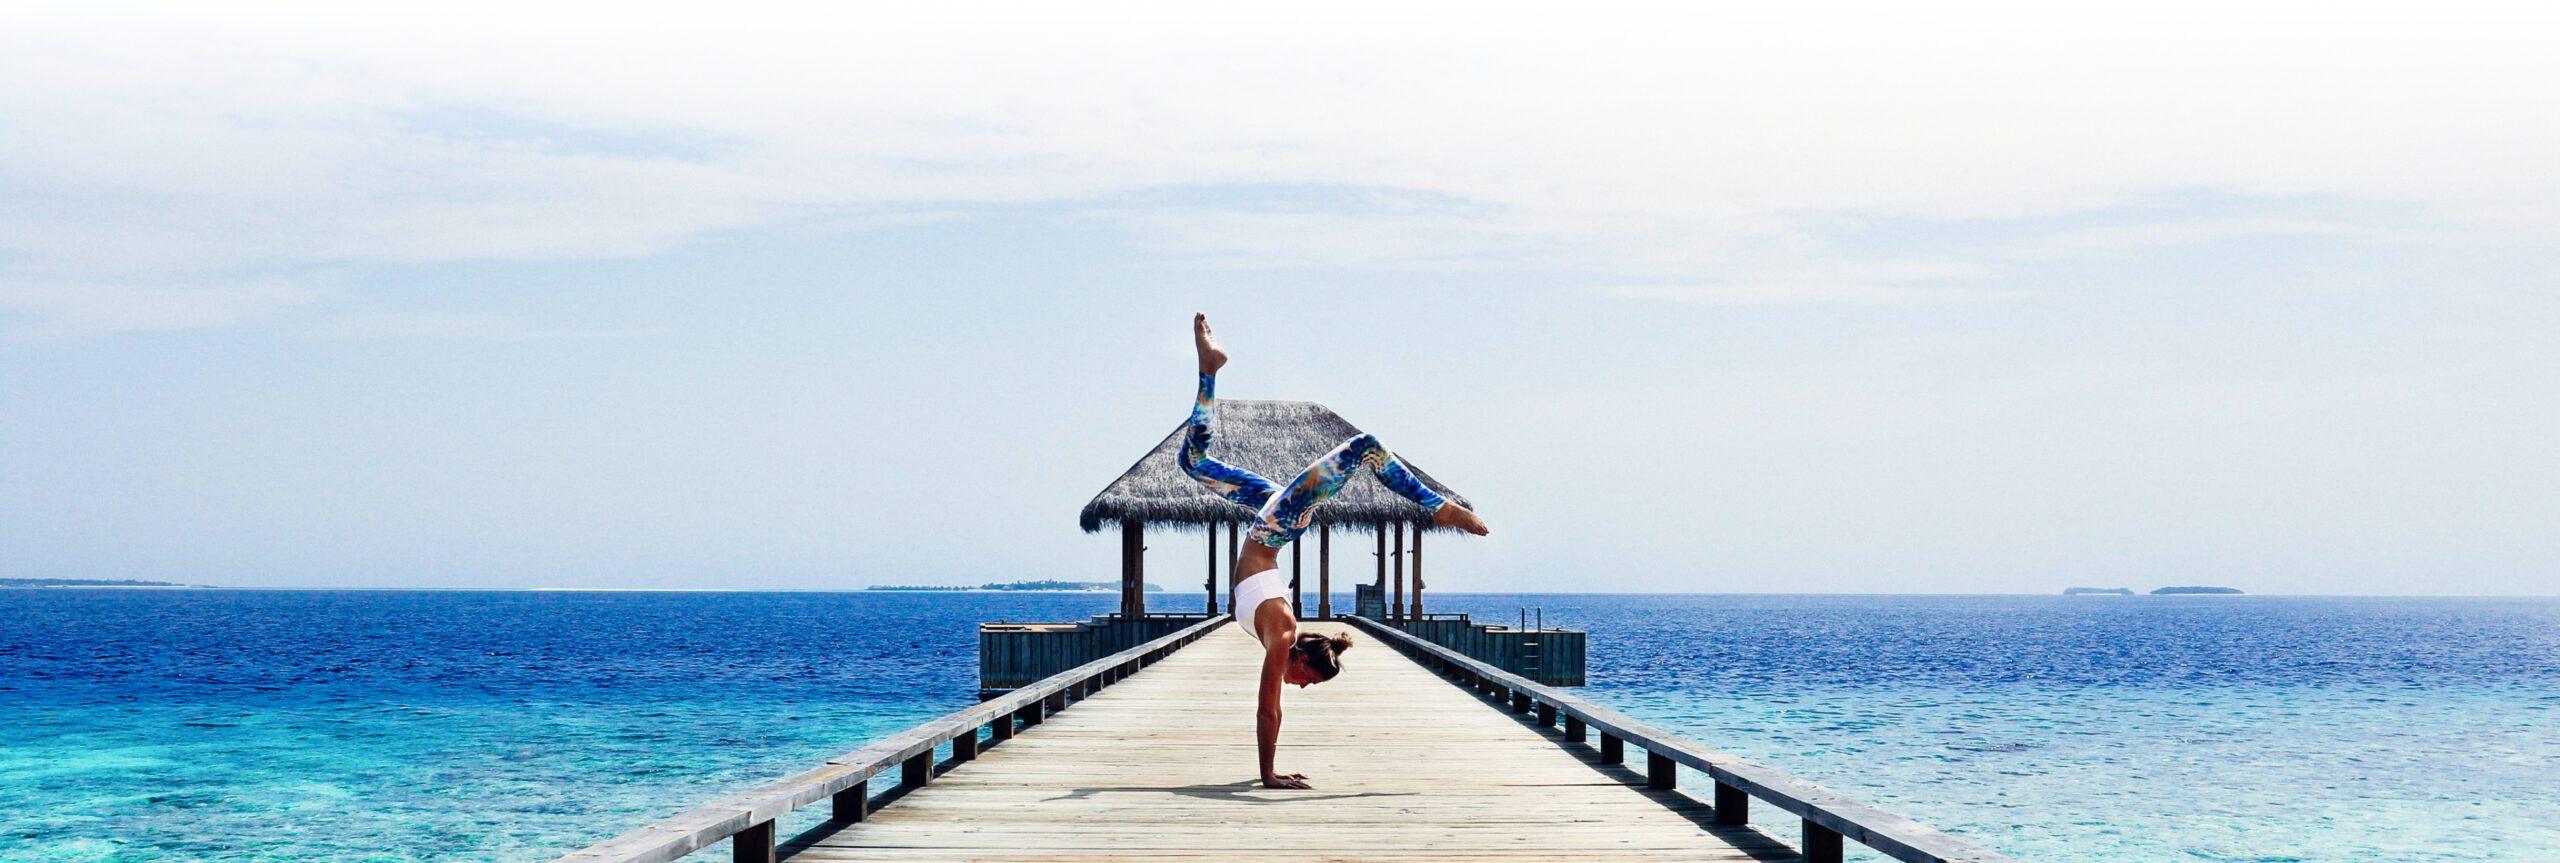 A visiting practitioner practicing yoga on a pier, part of Amilla Maldives' wellbeing programmes